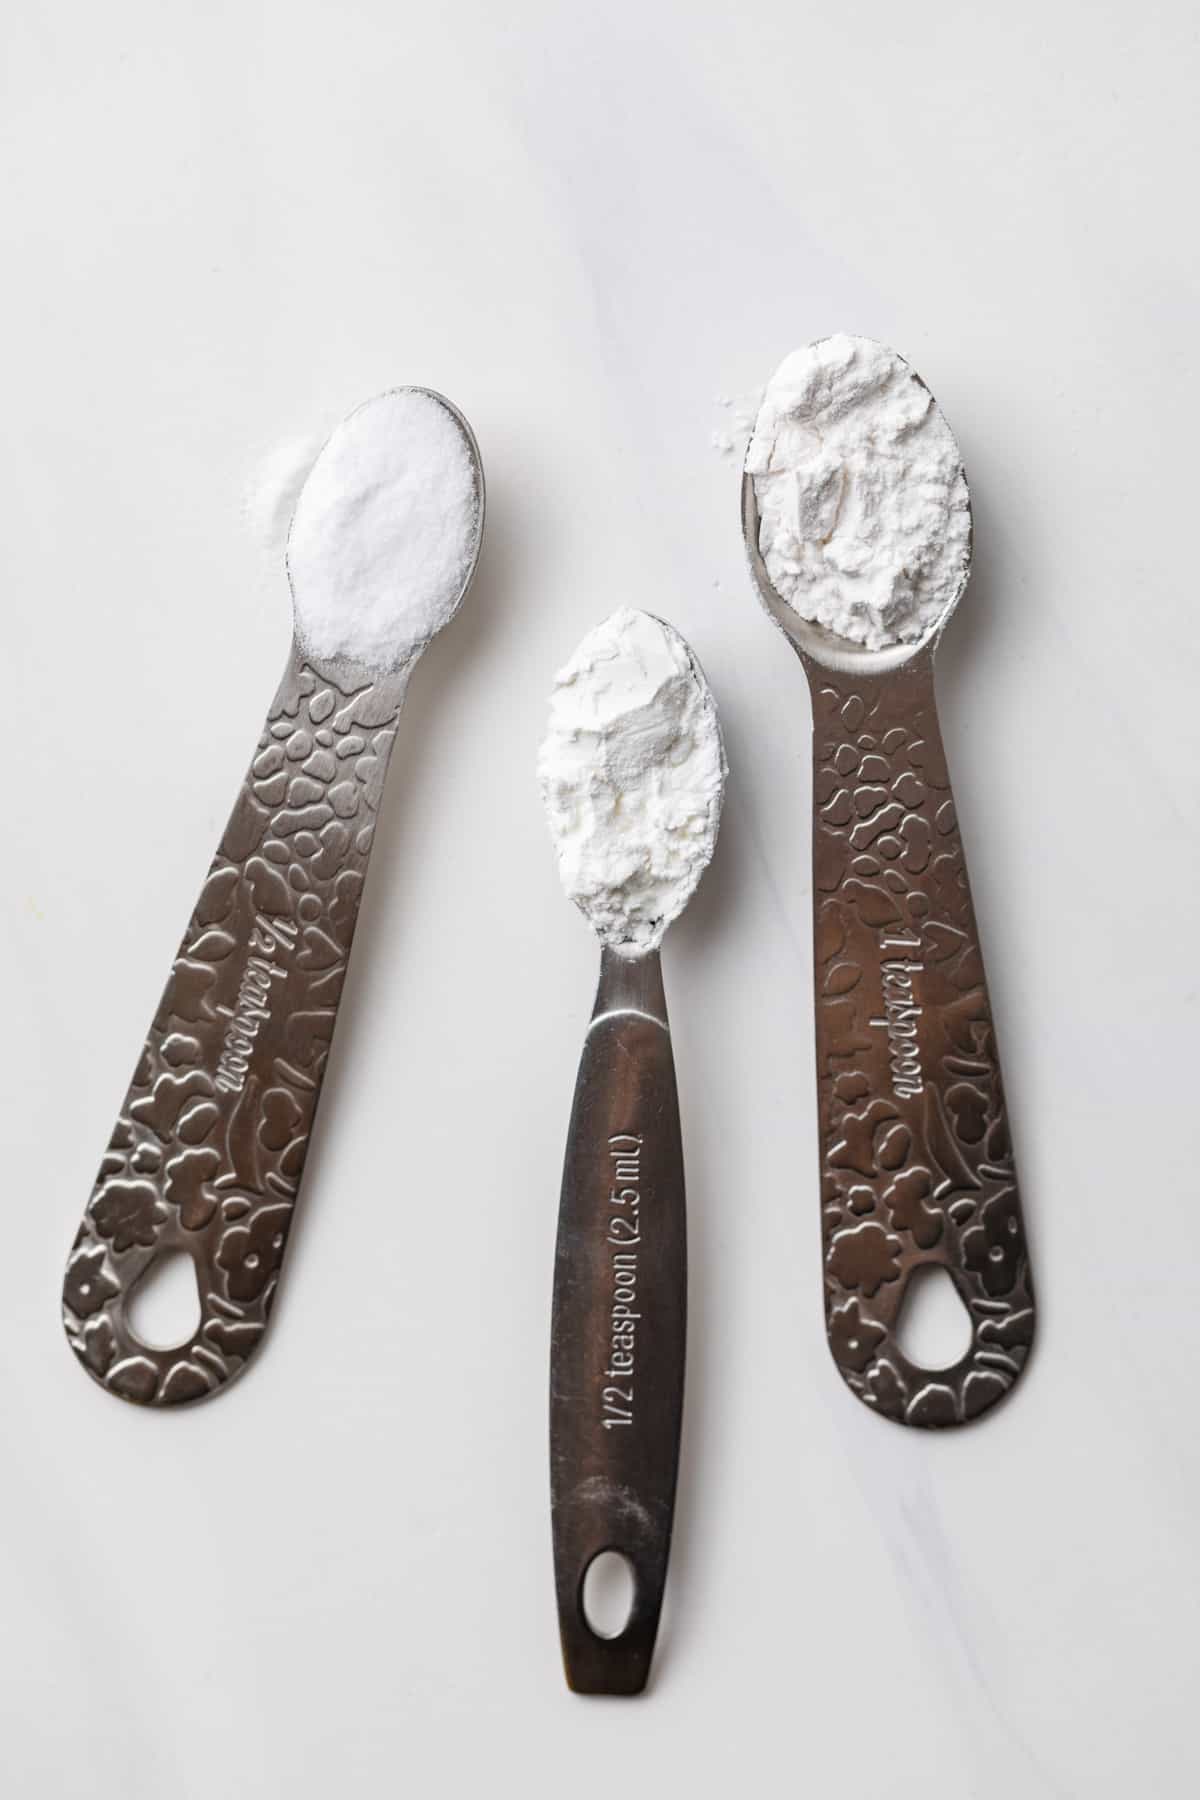 measuring spoons filled with baking soda, cream of tartar, and cornstarch